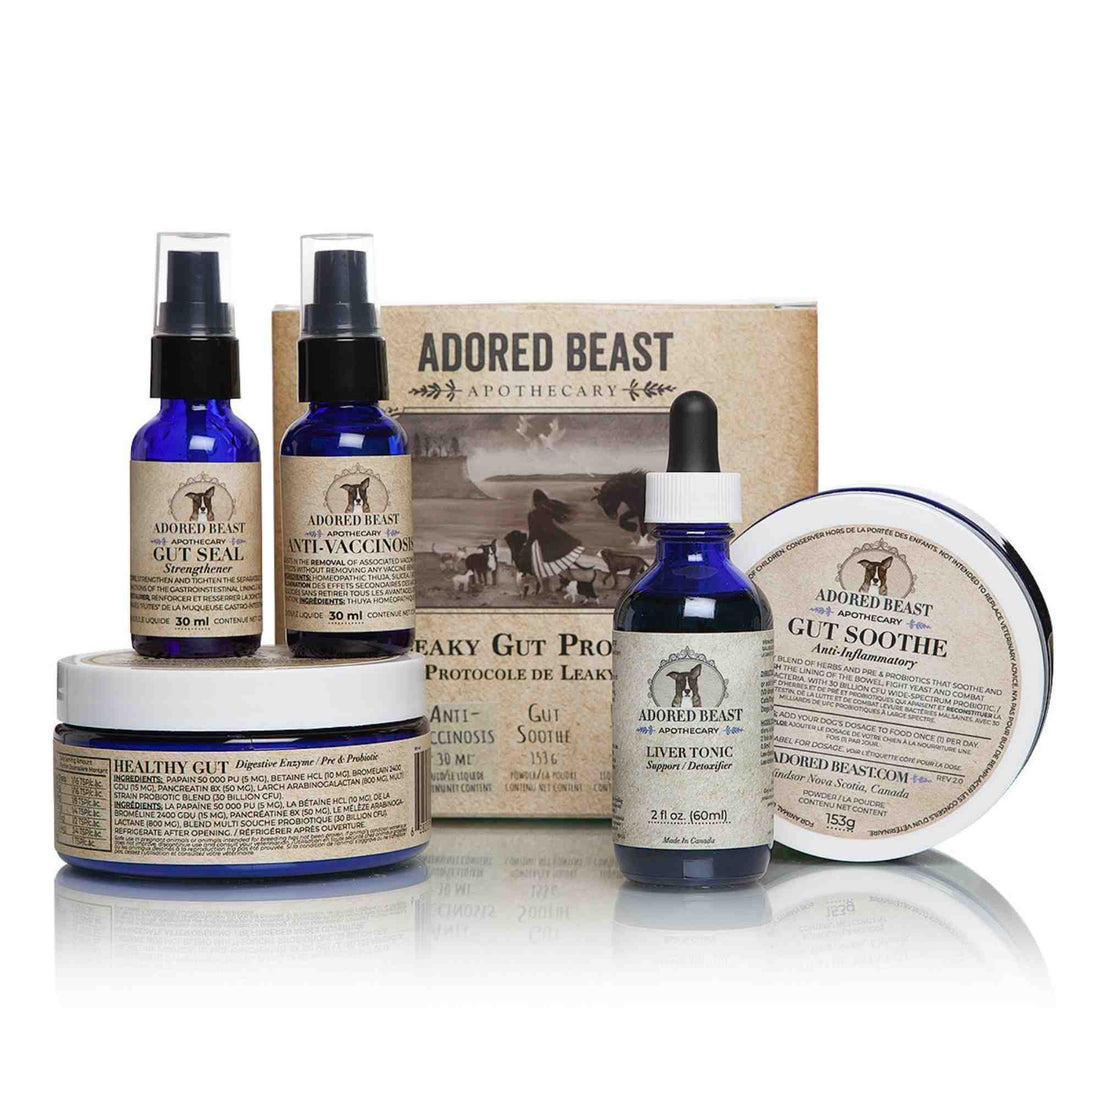 Leaky Gut protocol - Adored beast - 5 product kit with box